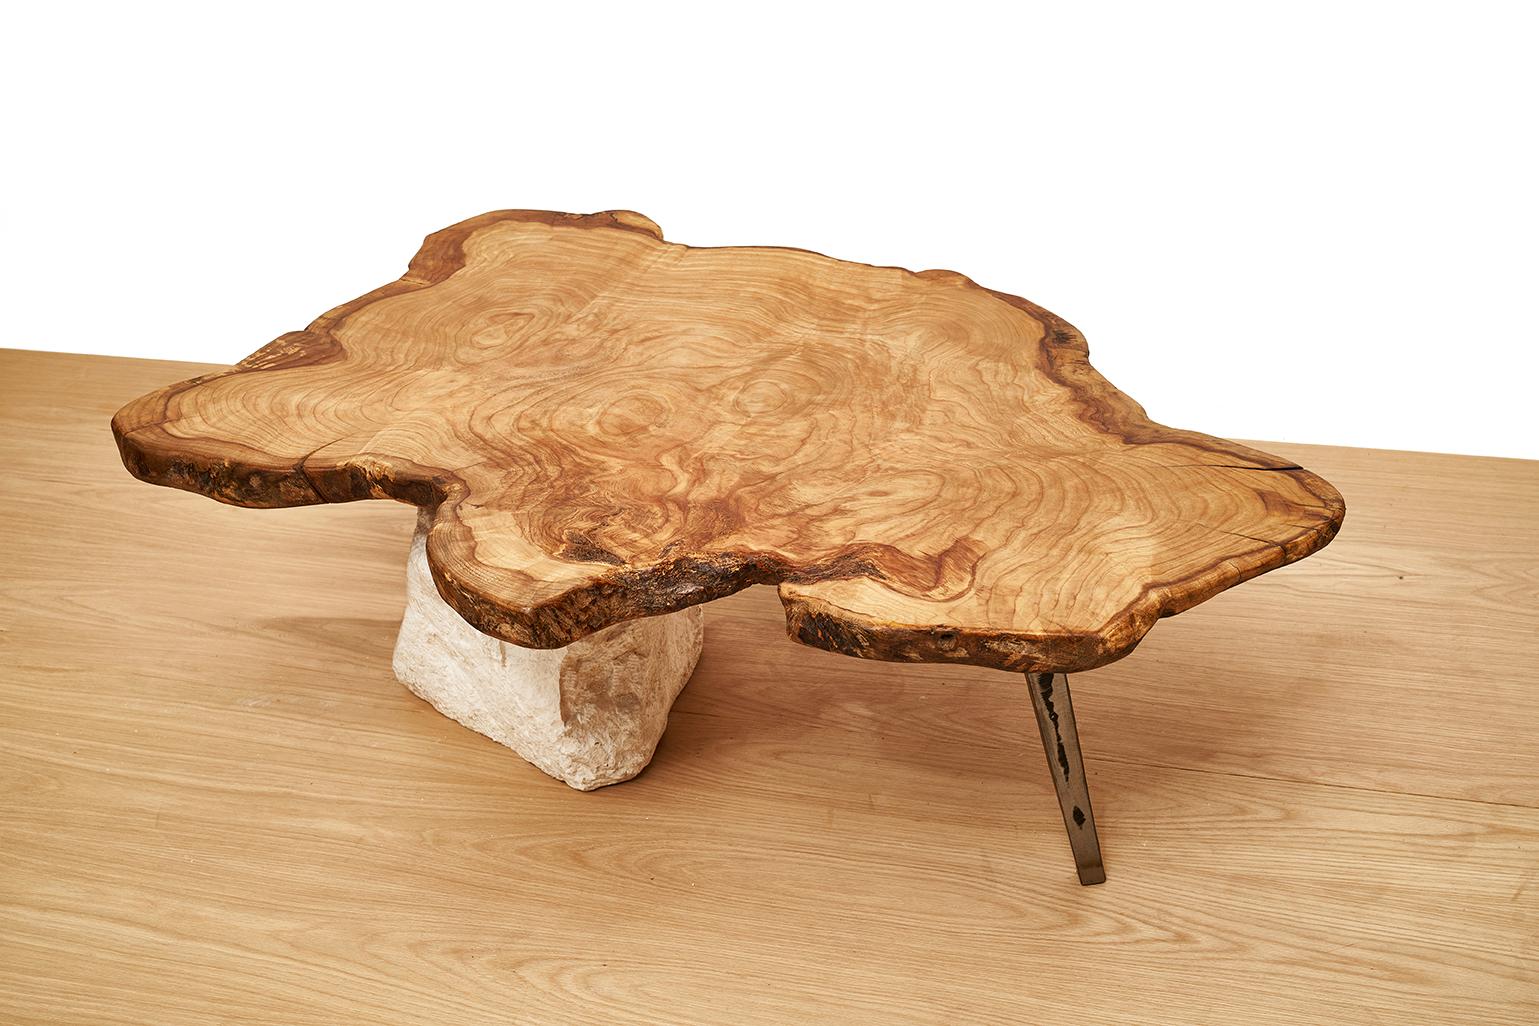 Arte center table by Jean-Baptiste Van den Heede
Signed unique piece
Dimensions: L 113 x D 80 x H 40 cm
Materials: chestnut

Design tables from the ARTE collection in walnut wood with metal legs or legs in oak and hand-carved natural